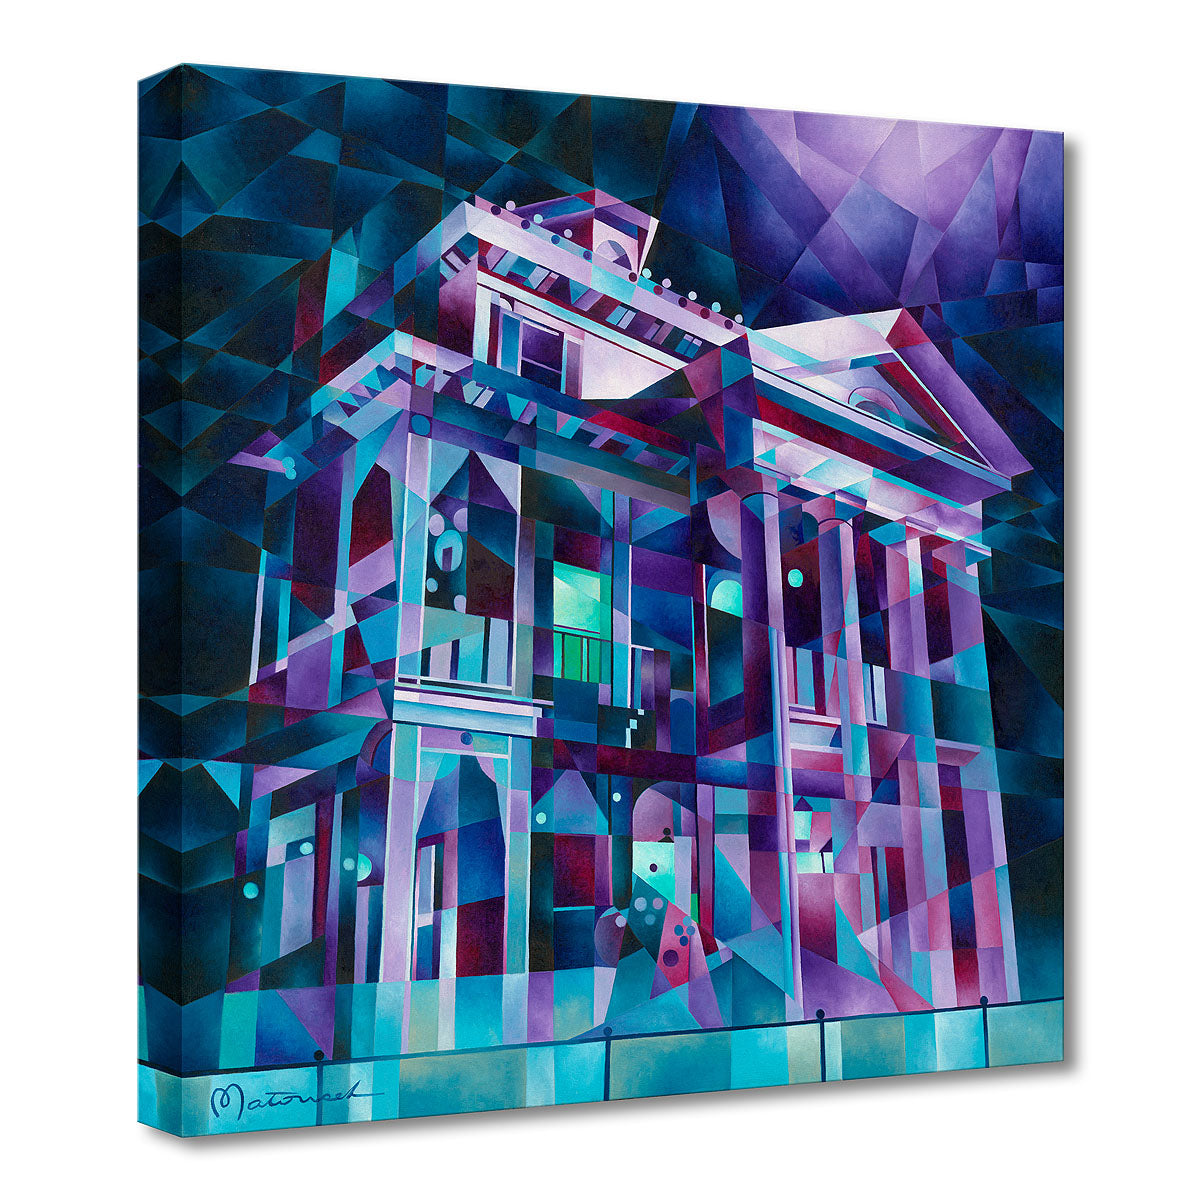 The Haunted Mansion By Tom Matousek Signed And Numbered Editiondisney Artwork Disney Fine Art 0200